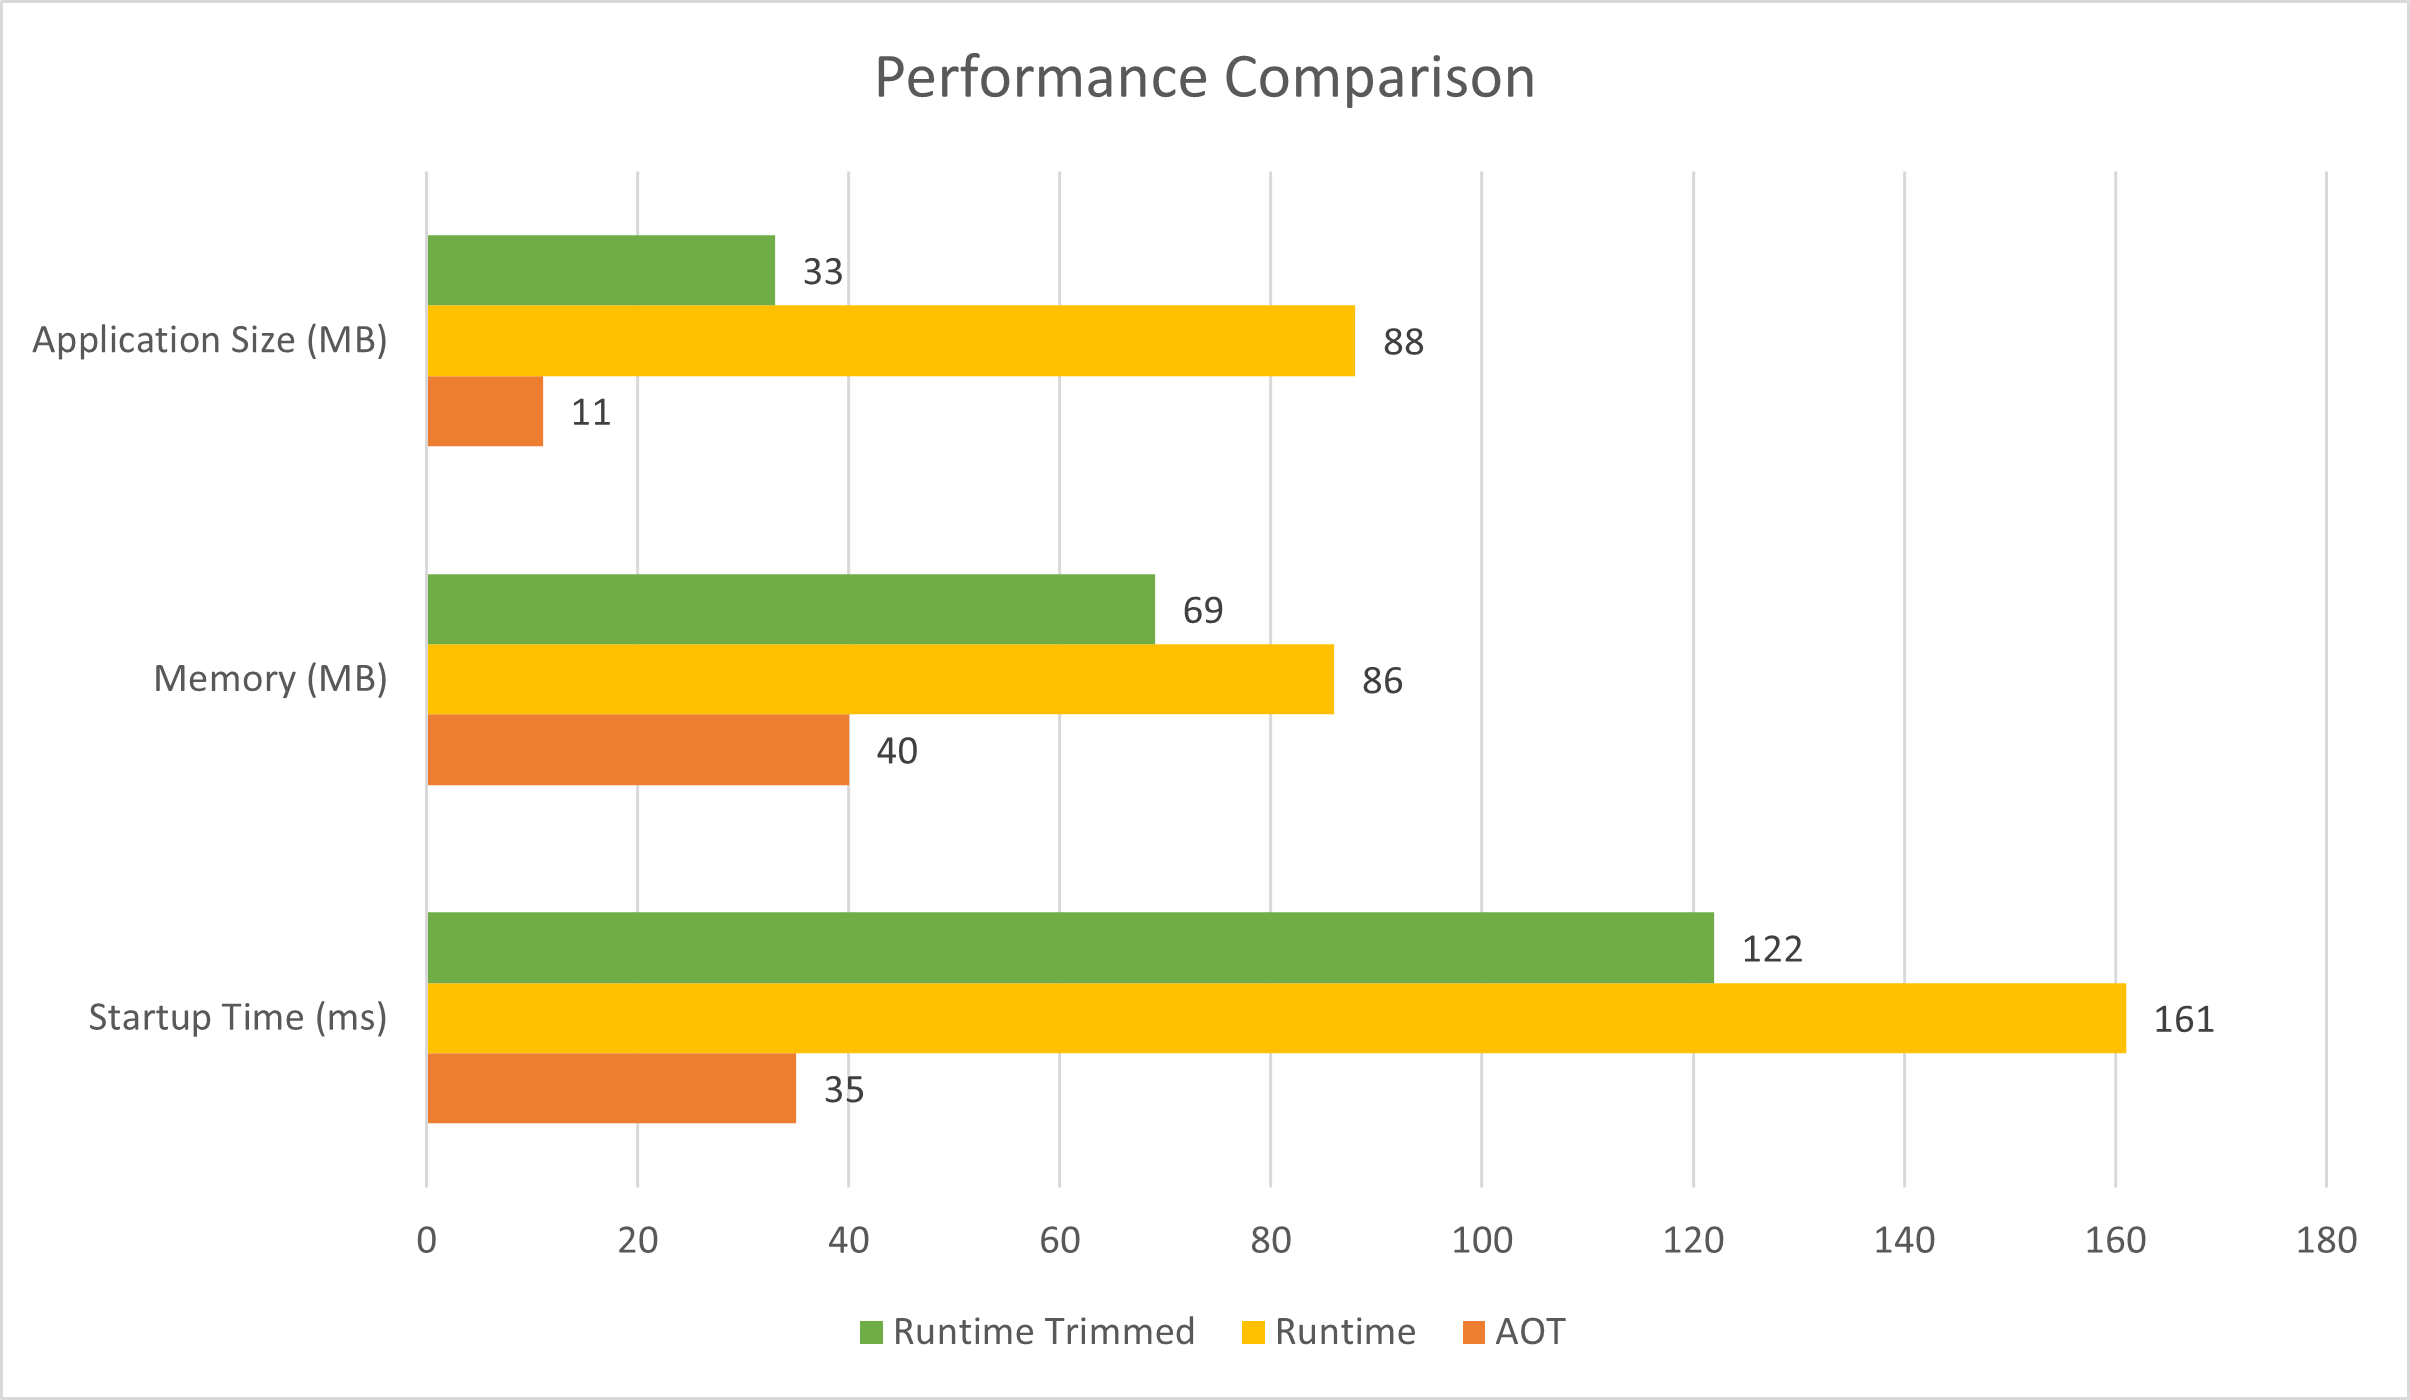 Chart showing comparison of application size, memory use, and startup time metrics of an AOT published app, a runtime app that is trimmed, and an untrimmed runtime app.